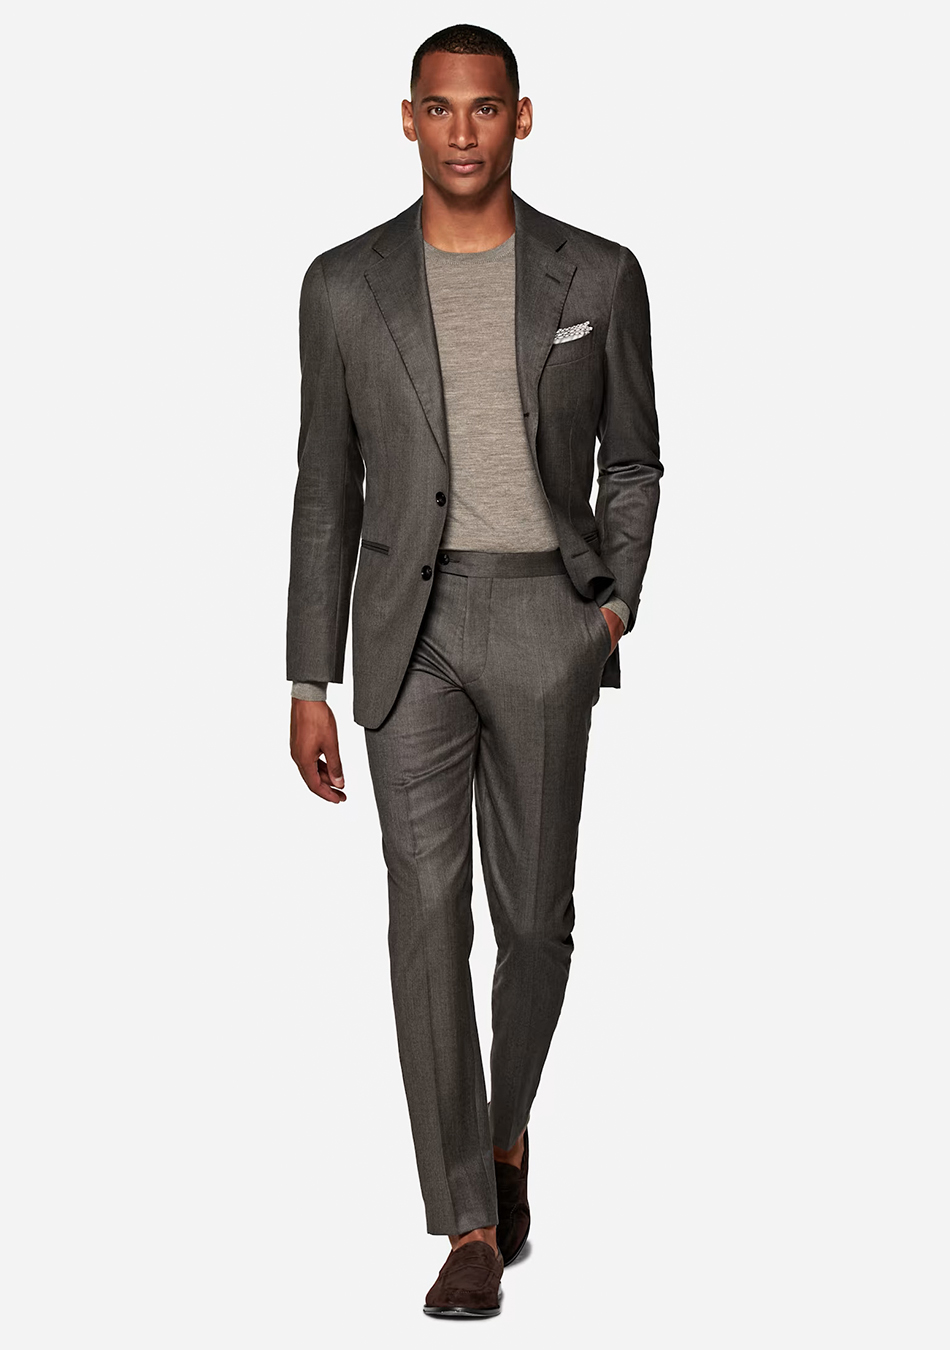 Charcoal grey houndstooth suit, grey t-shirt, and brown loafers